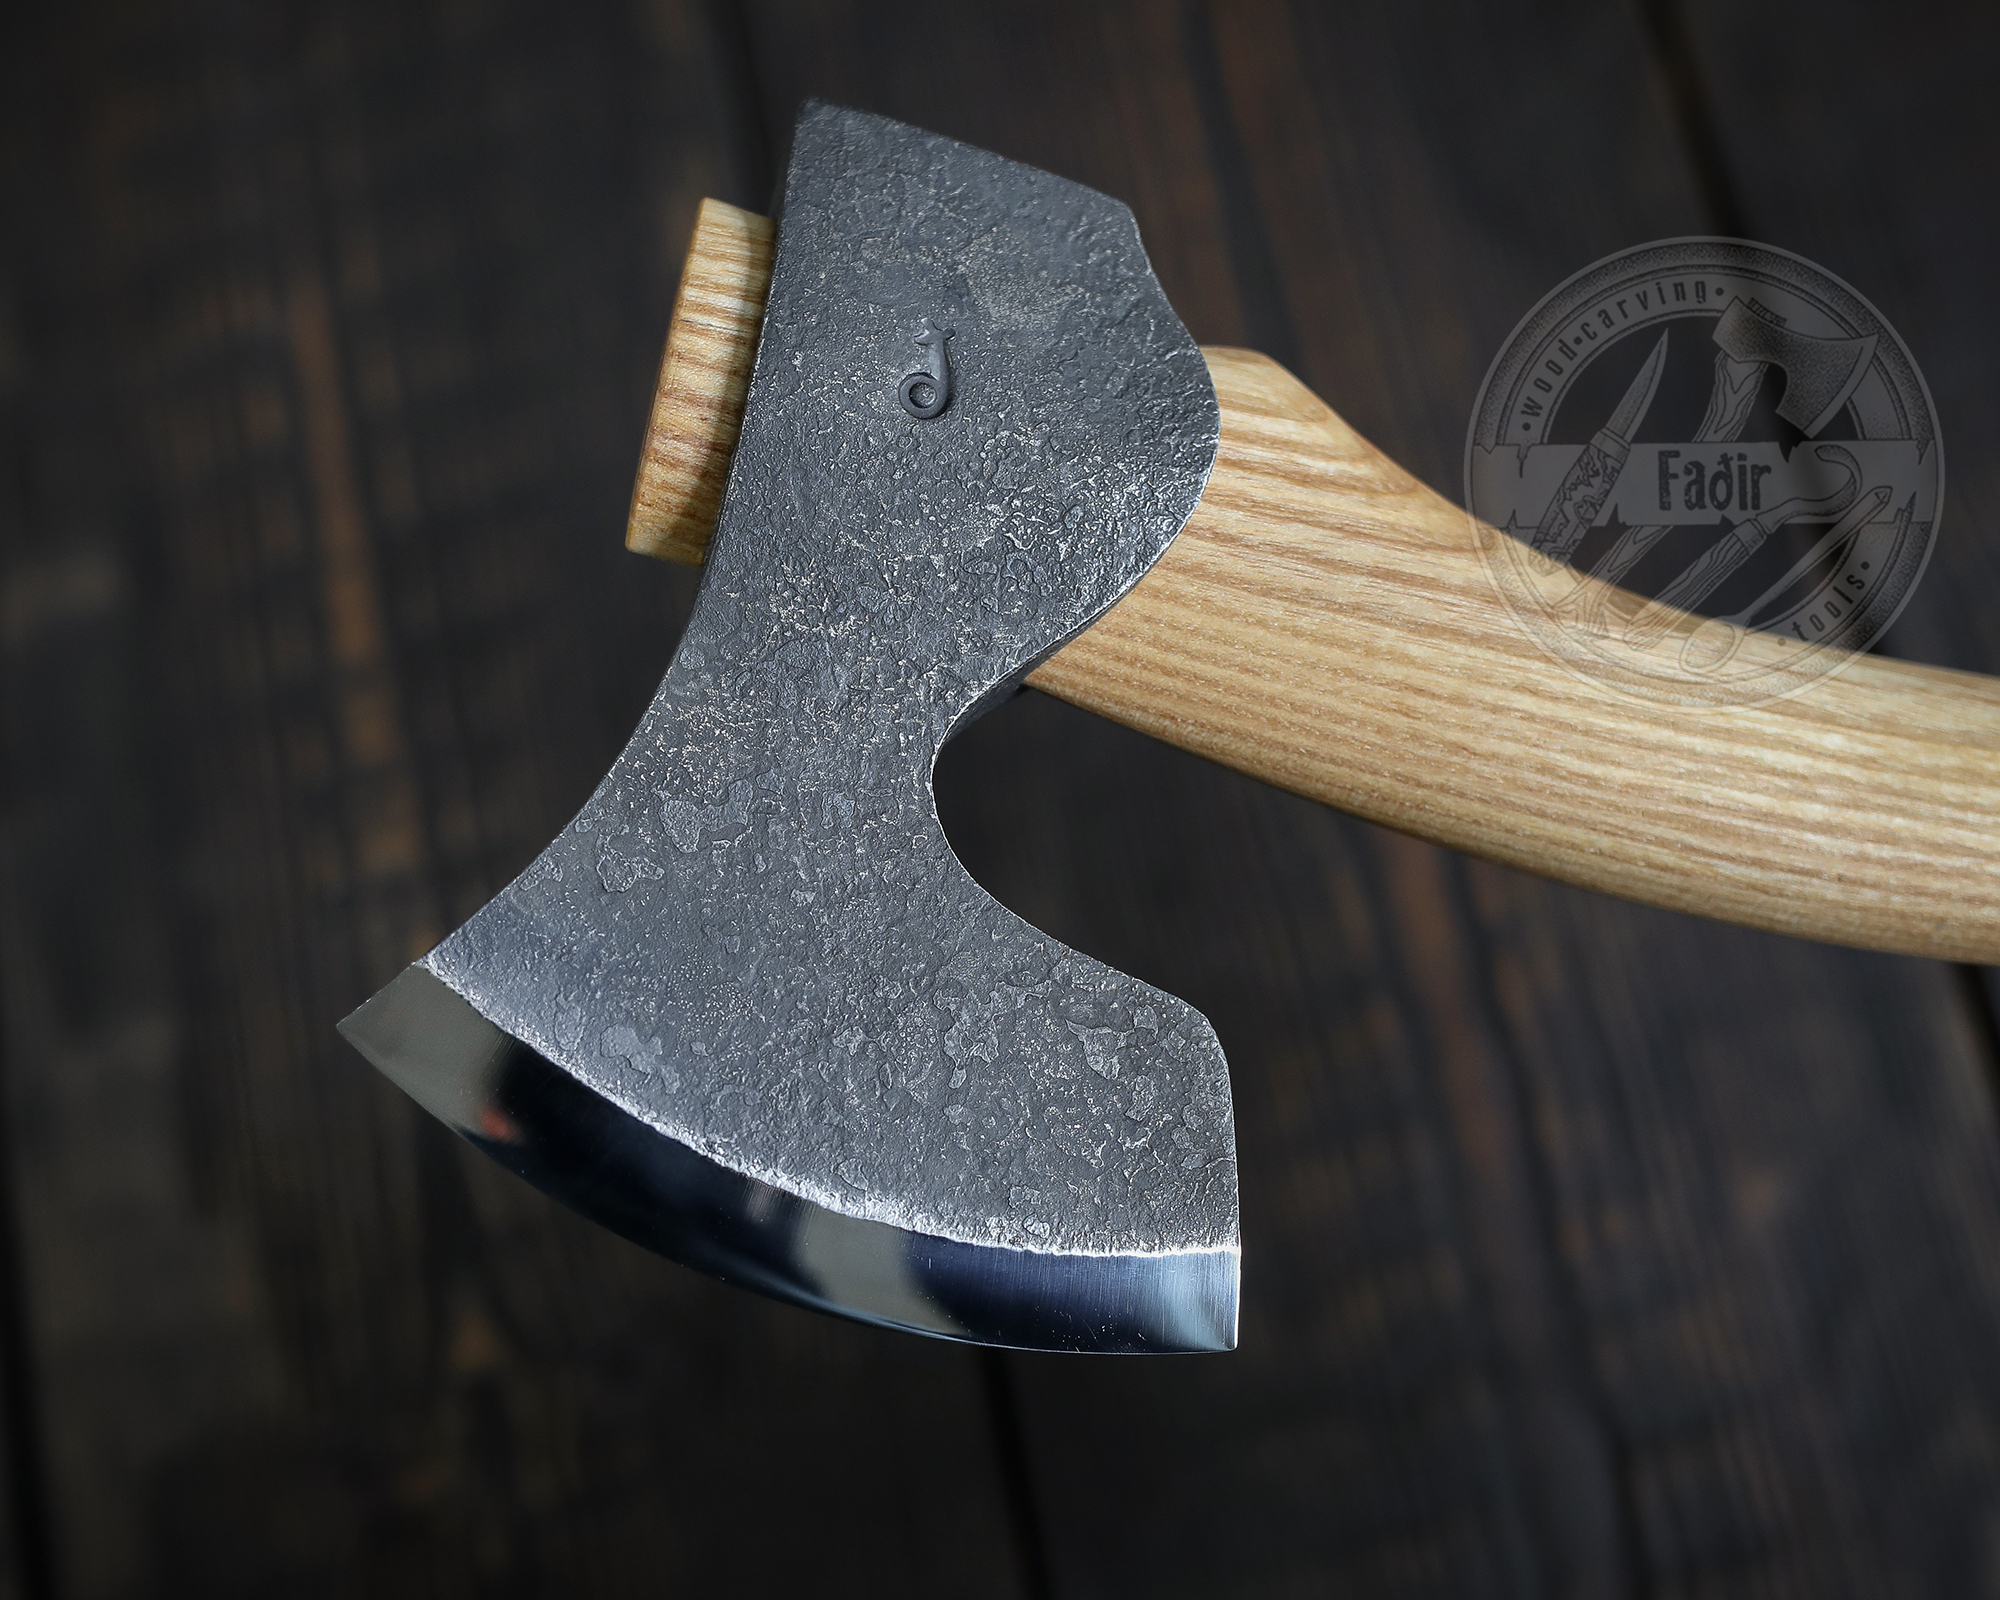 Carving Axe, Axe for Green Woodworking, Wood carving Axe - The